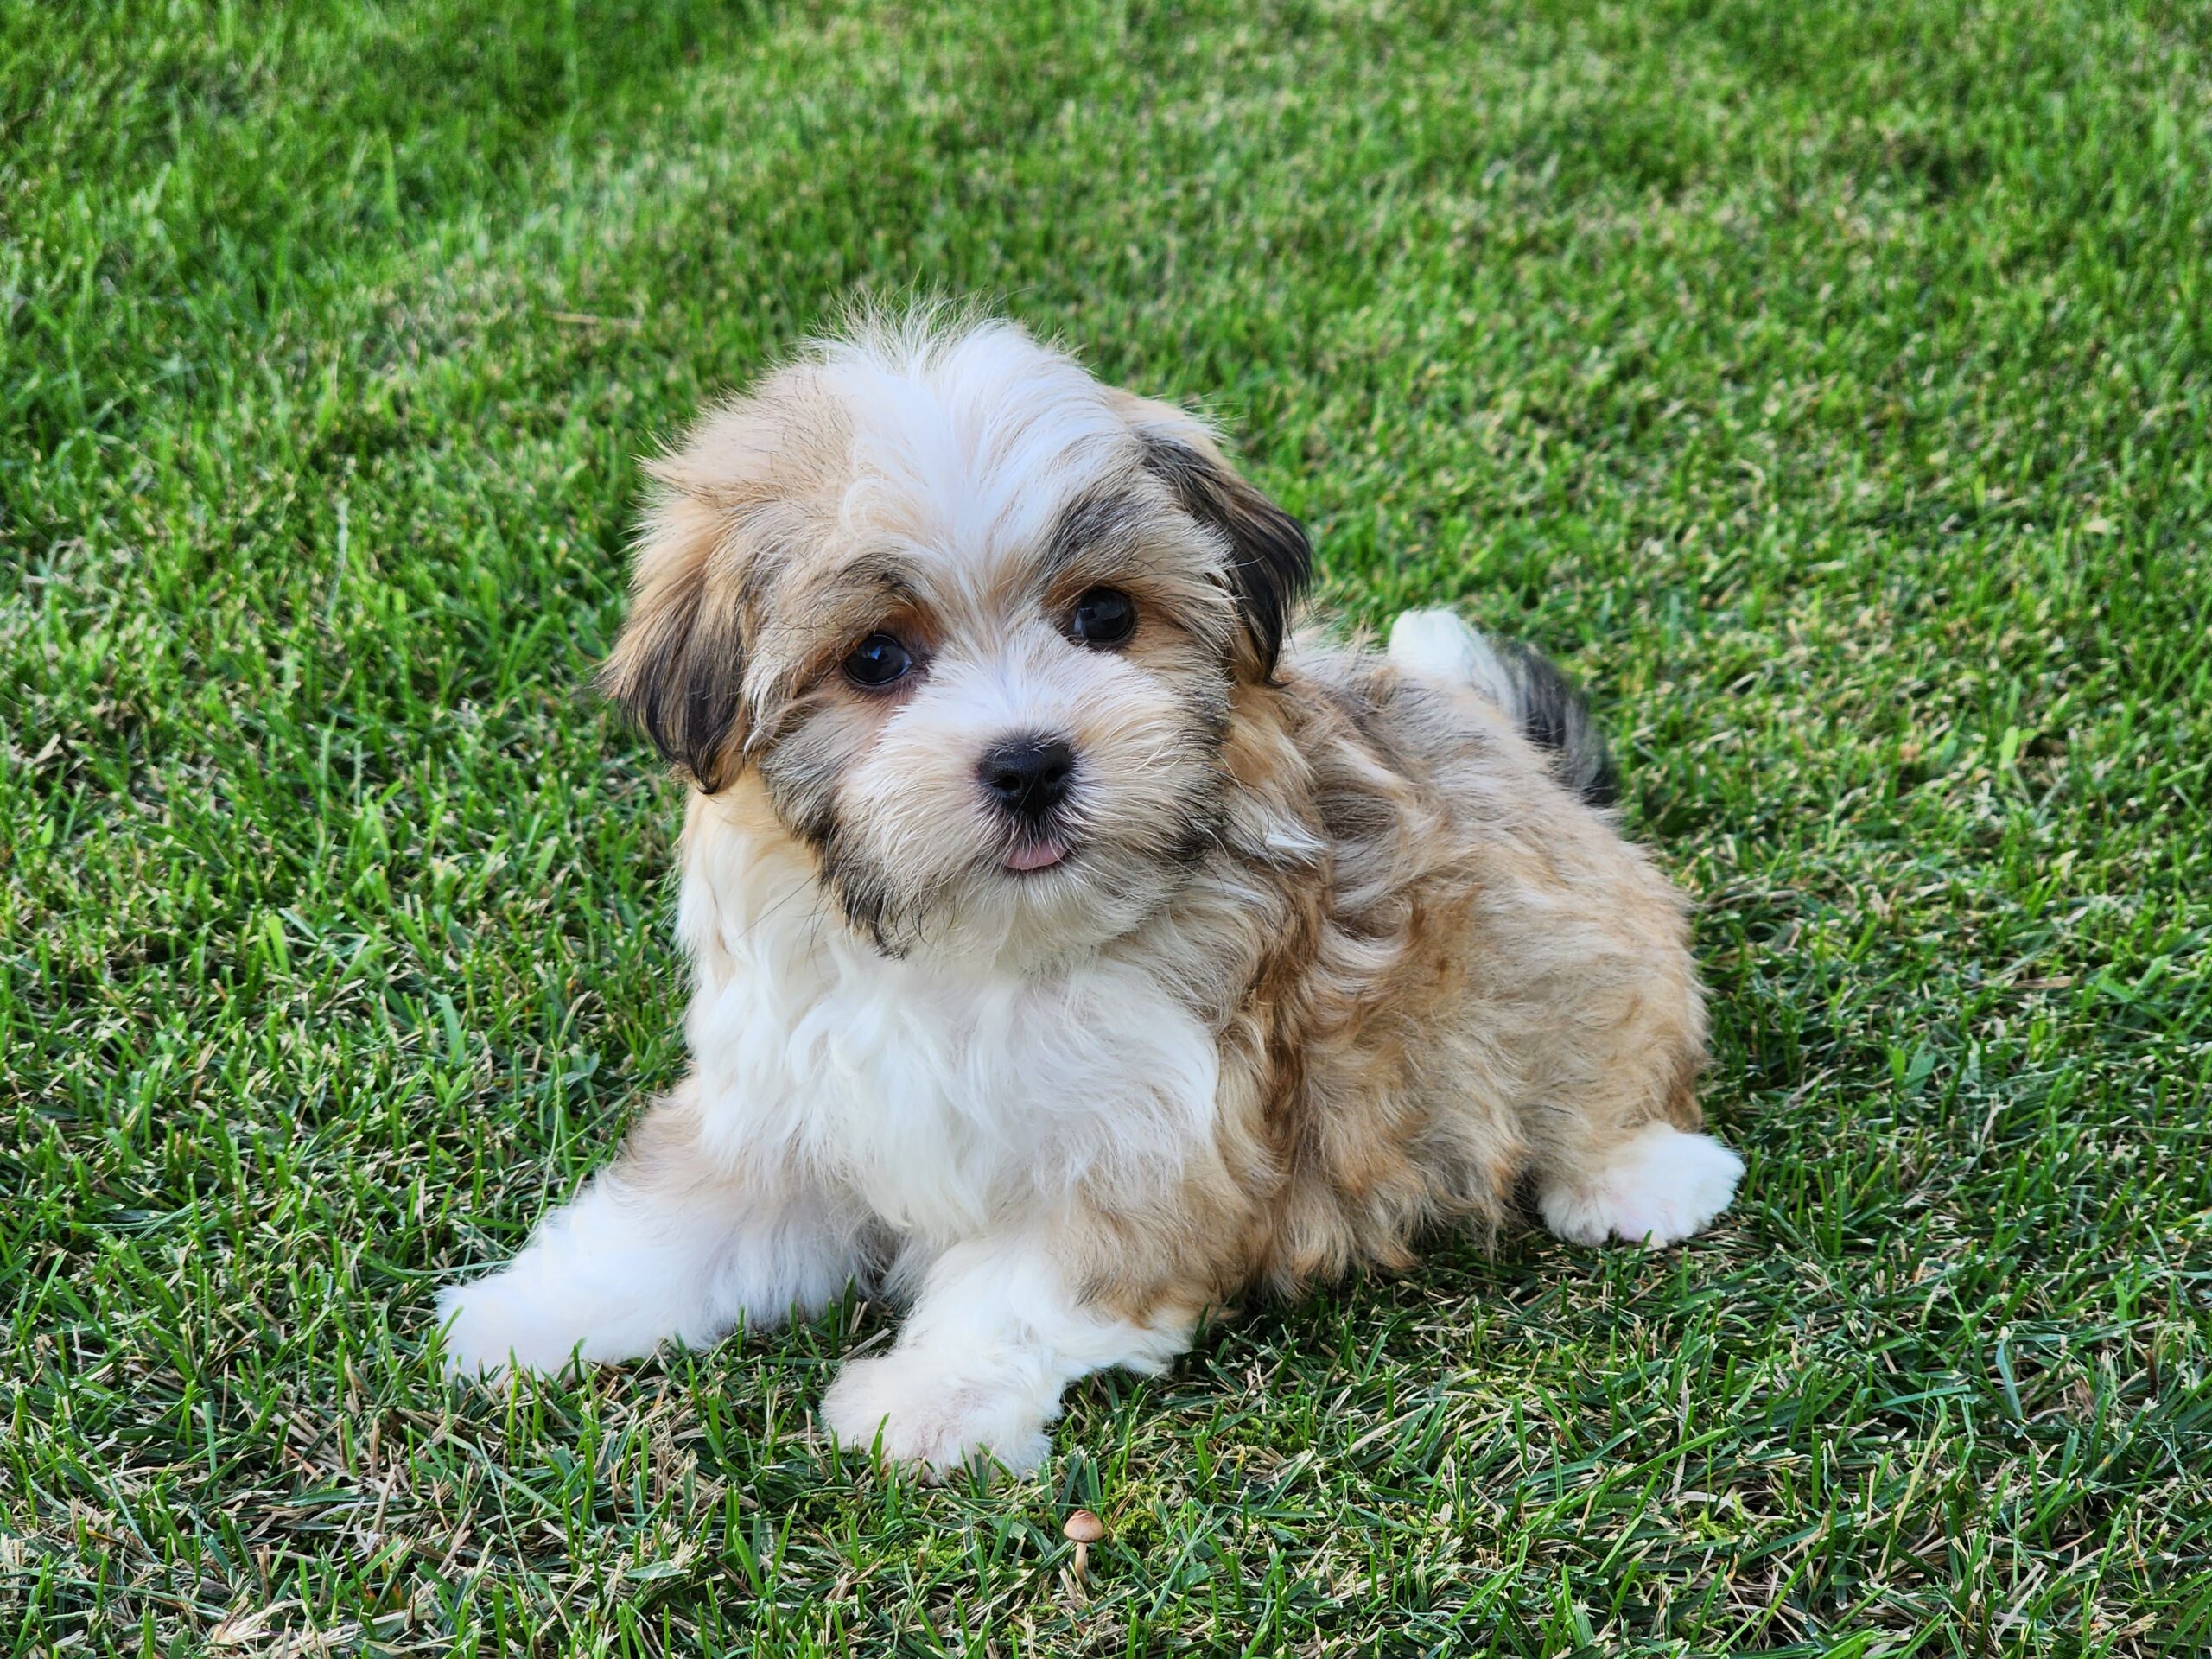 "Ms. Josie" DOB: 7/29/23. Breed: Havanese. Sex: Feale. Available Now. Price: $2500